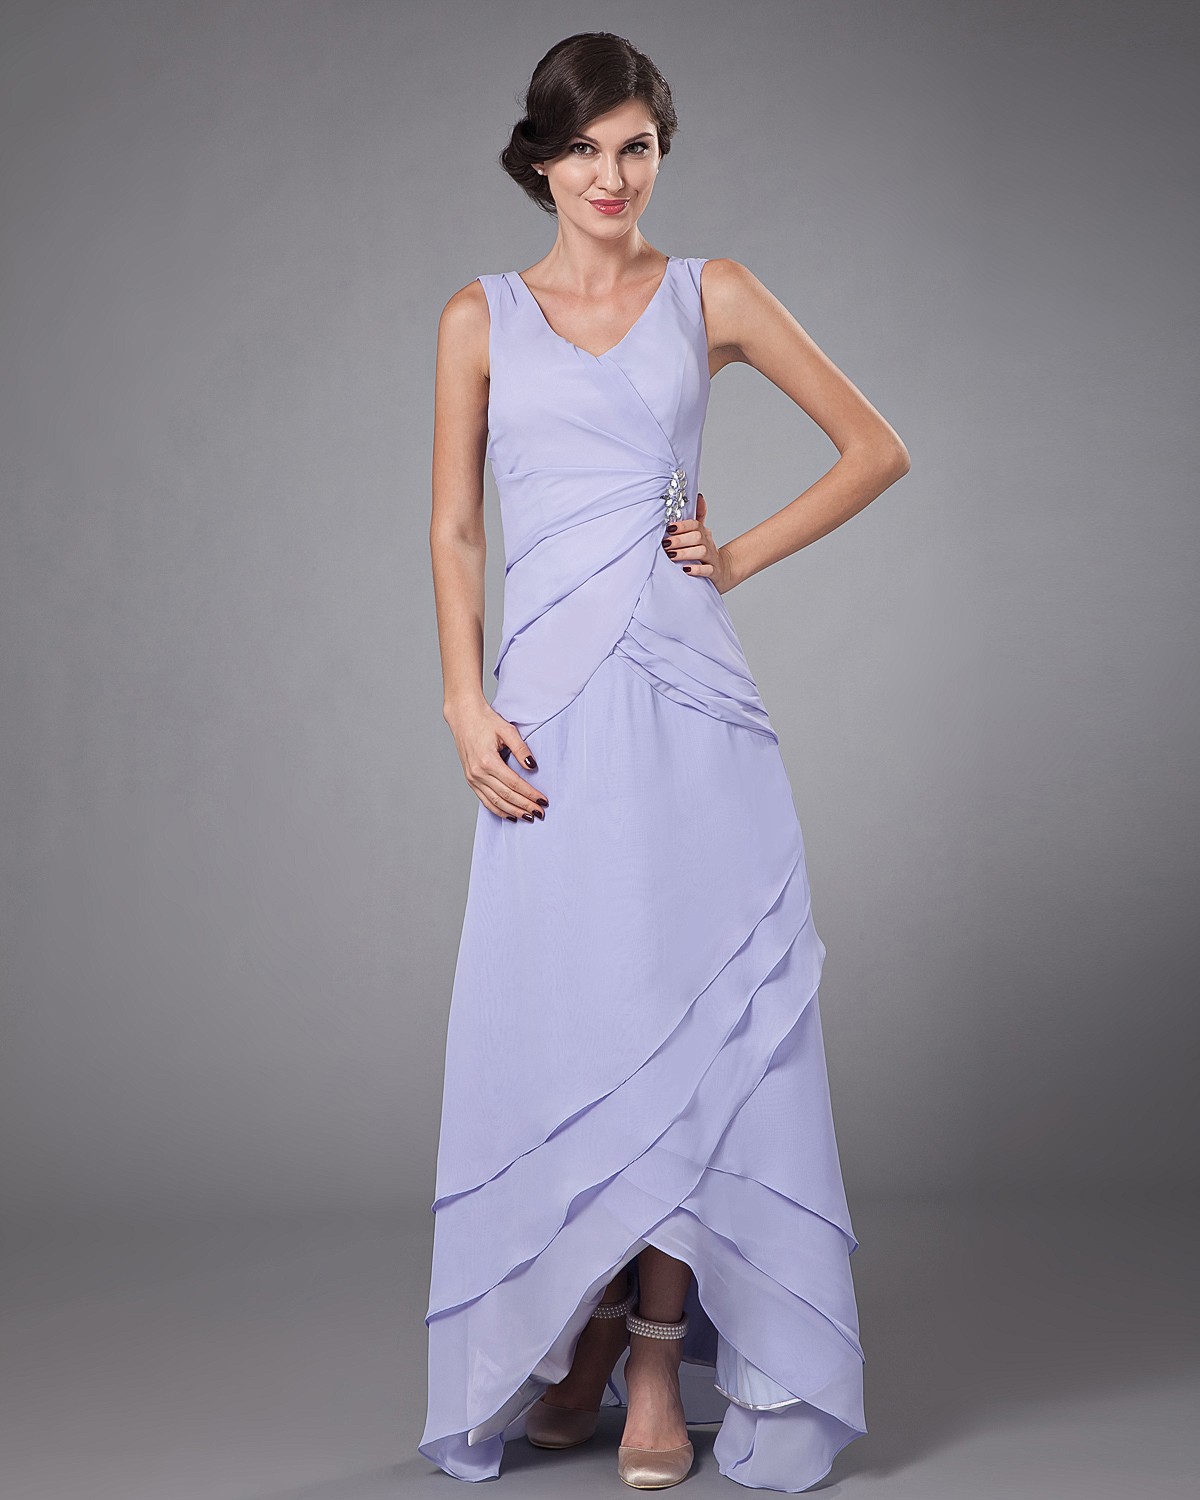 mother of the bride casual summer dresses